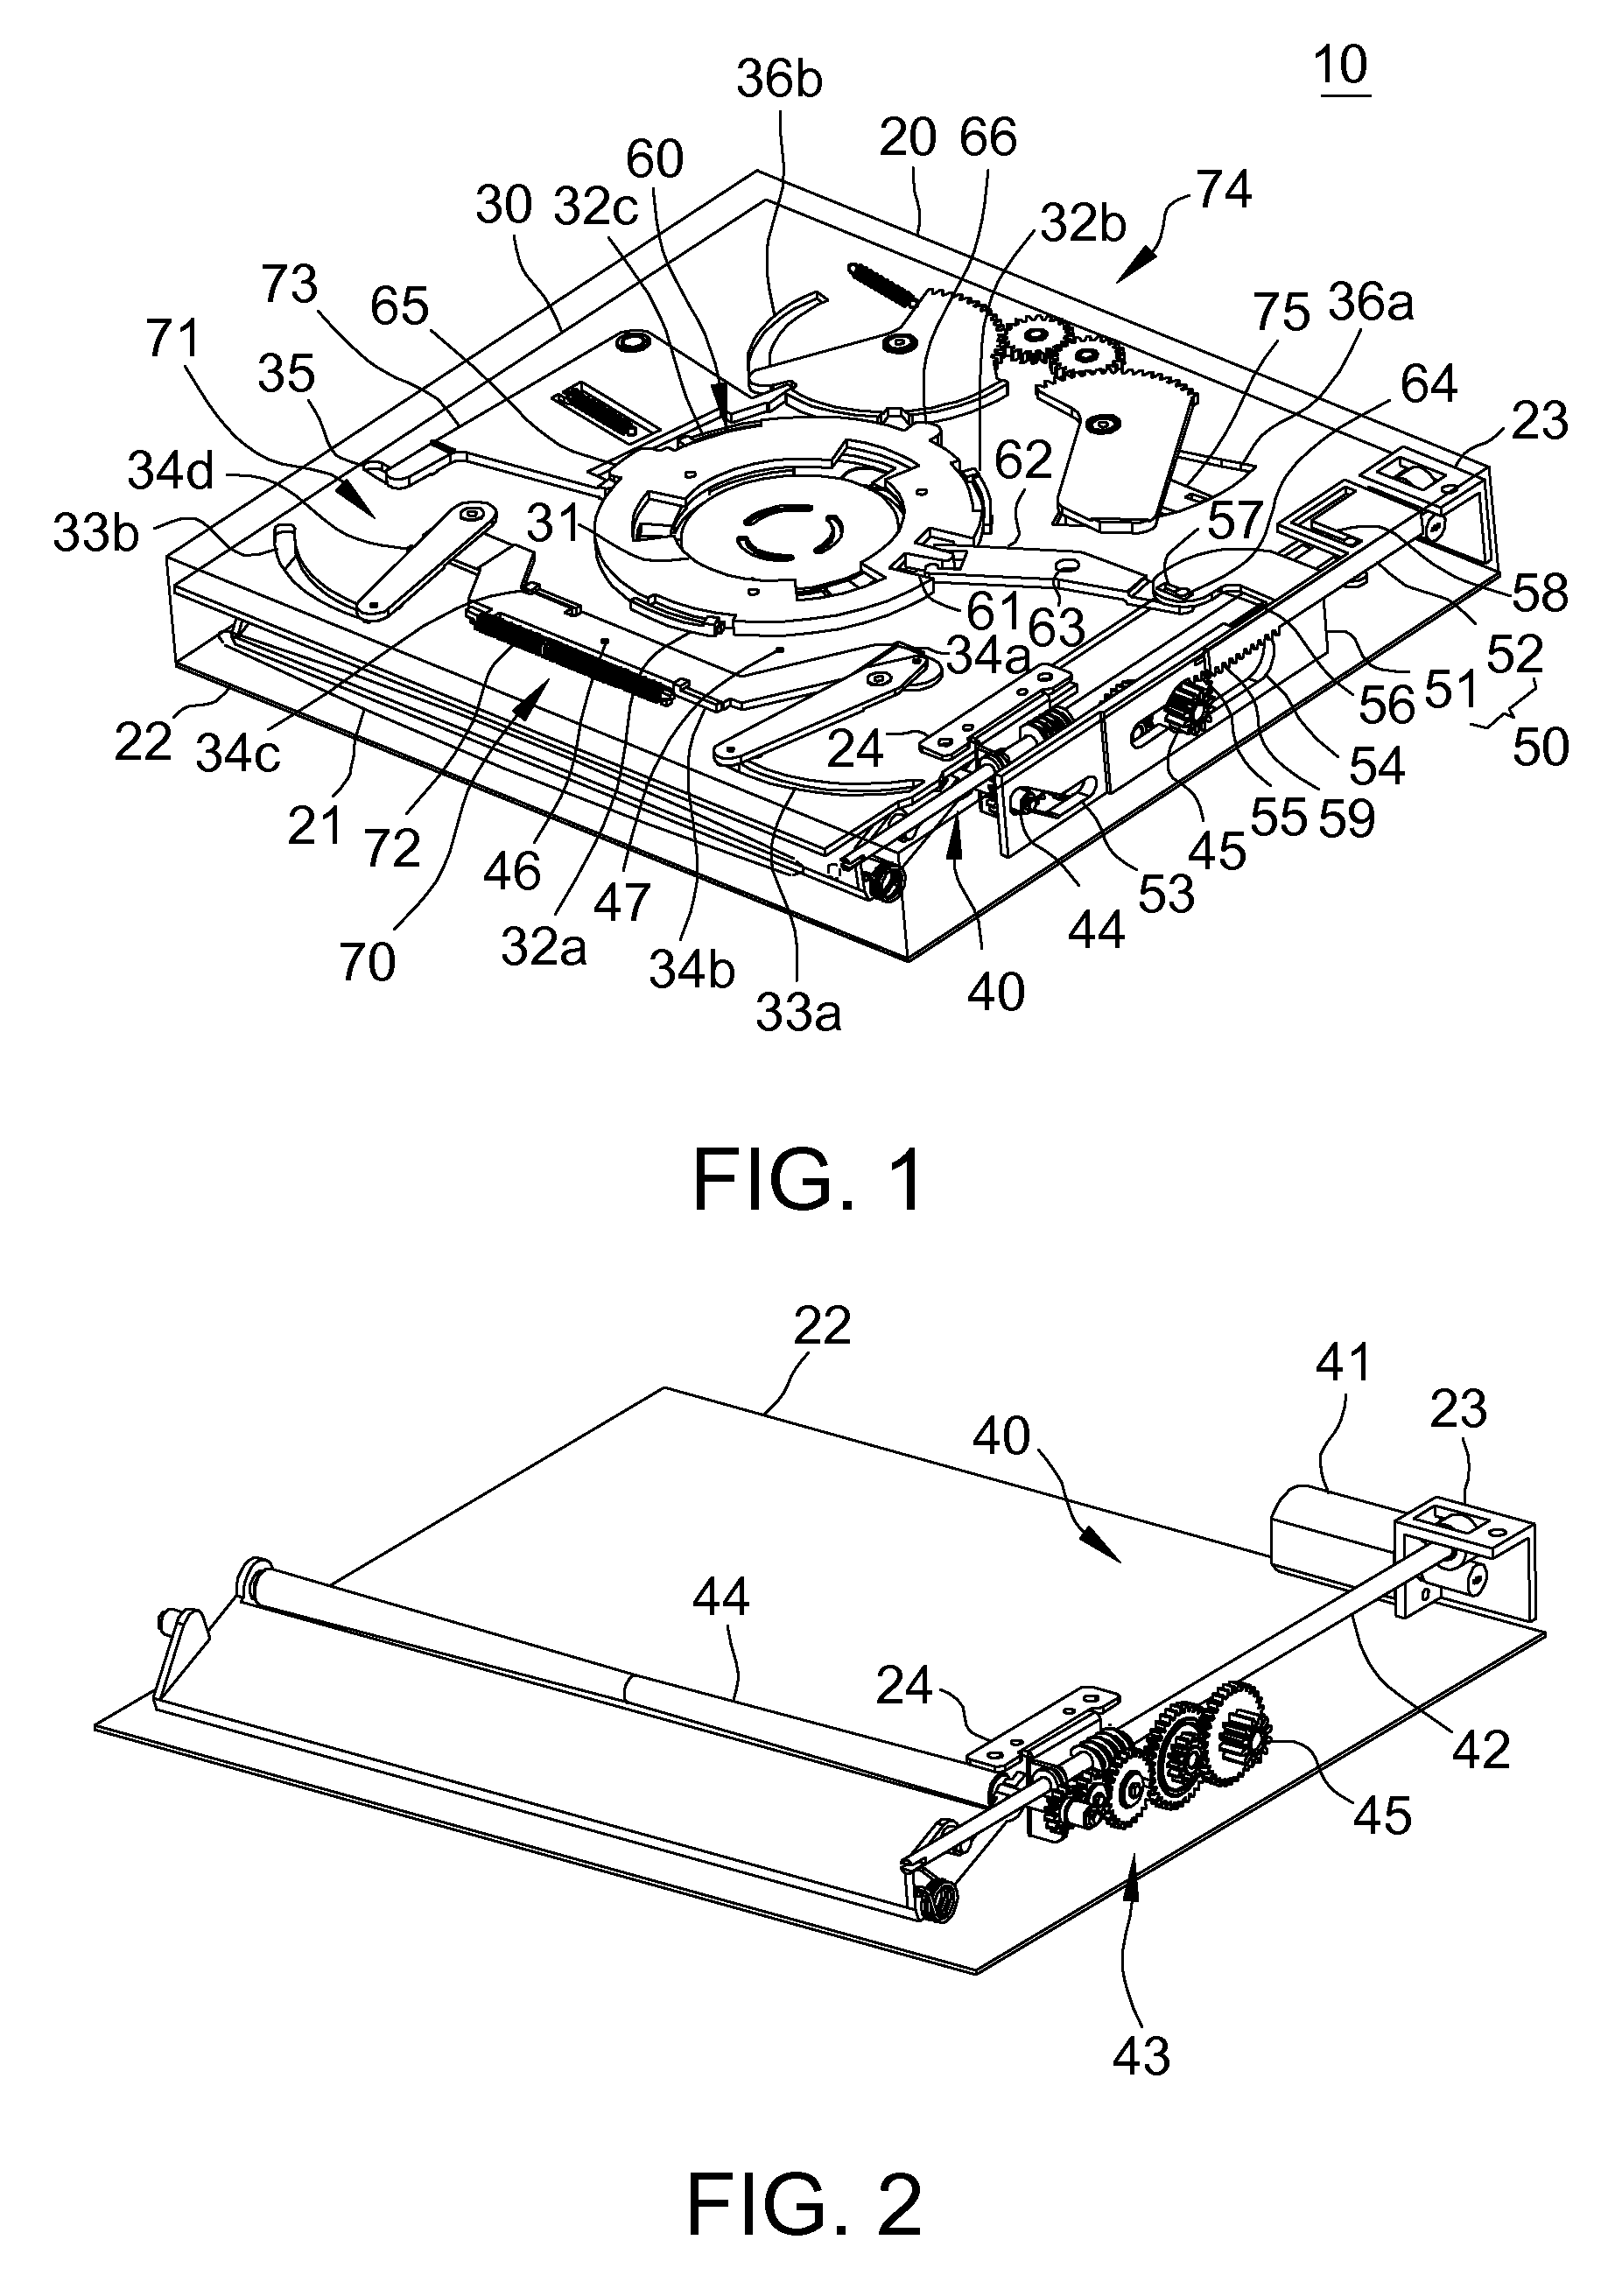 Slot-in optical disk drive